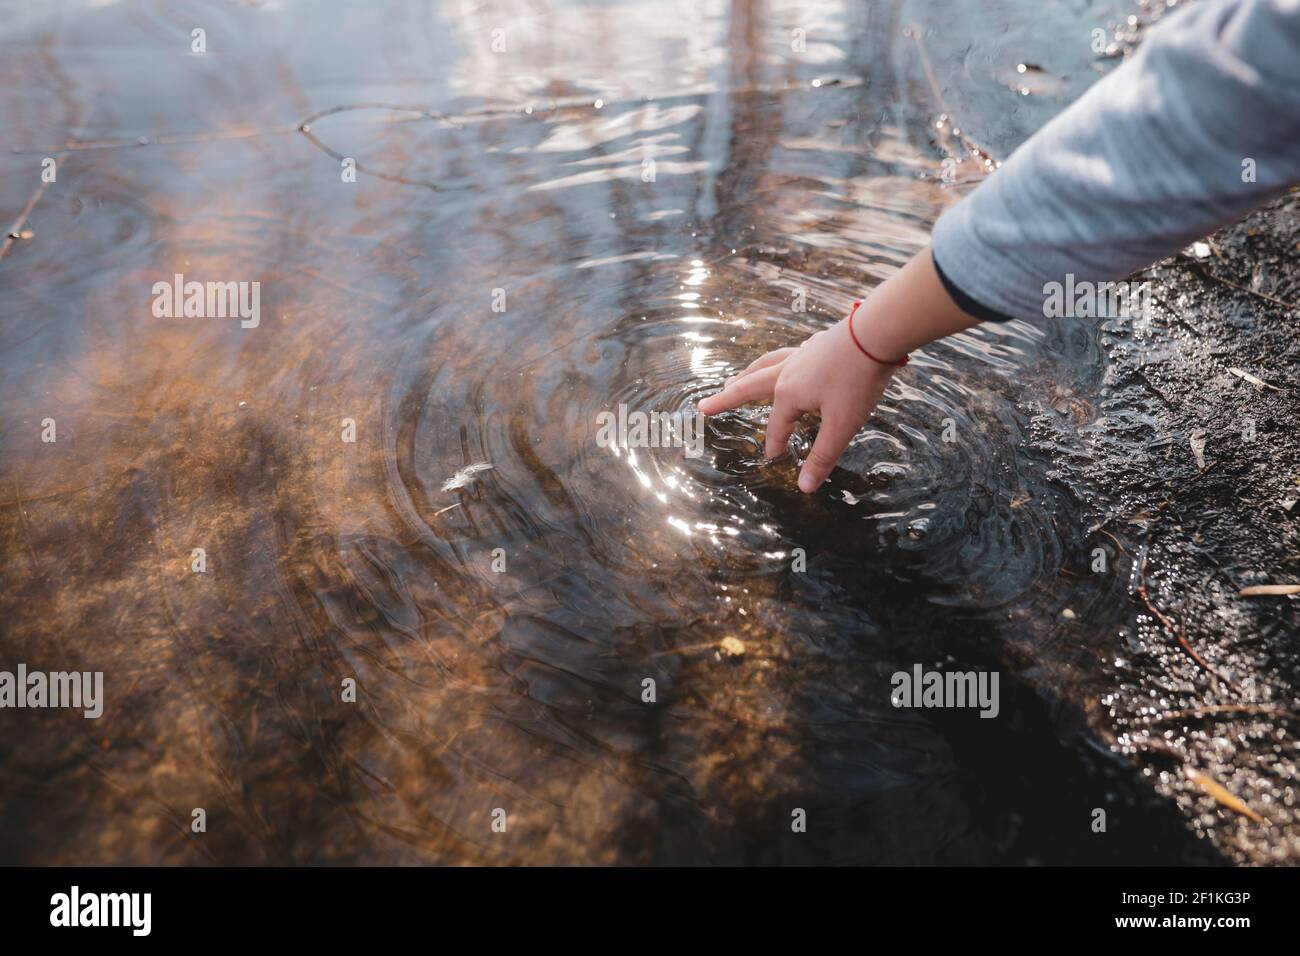 Shallow depth of field (selective focus) details with the hand of a young girl playing with her hand in the shallow water of a lake. Stock Photo